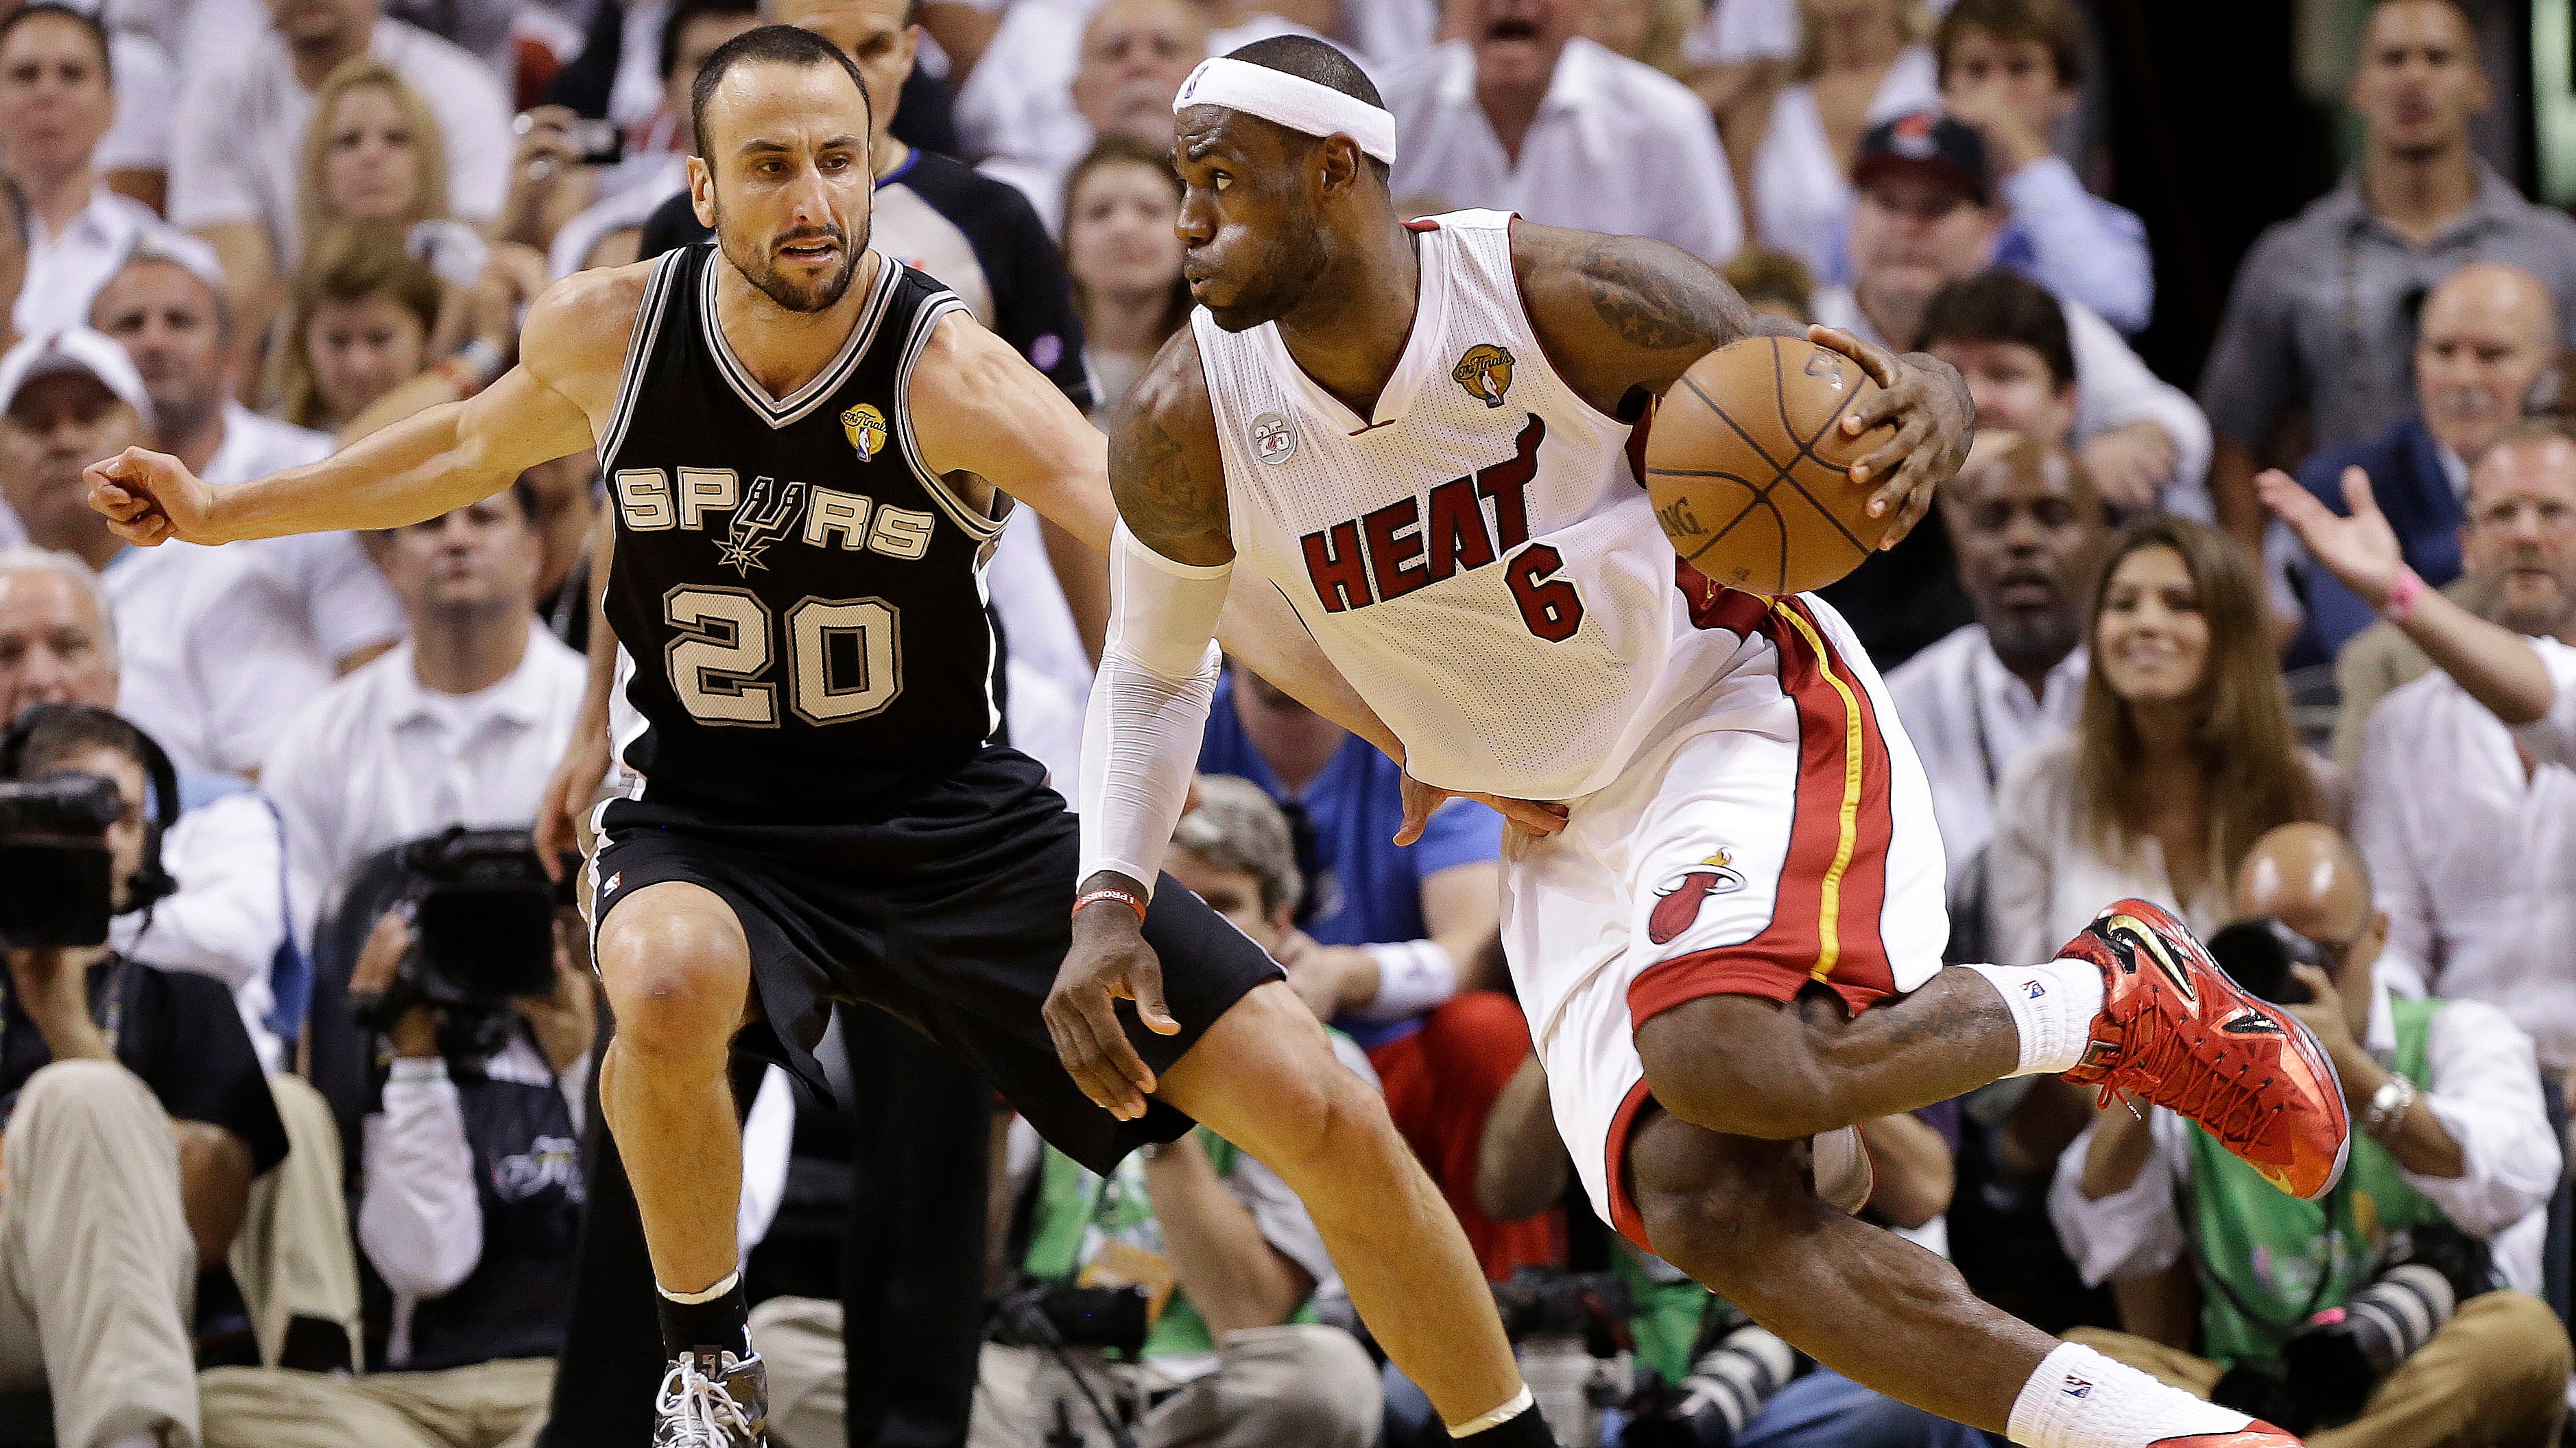 Spurs' Danny Green: Heat's LeBron James 'stopped himself' in Game